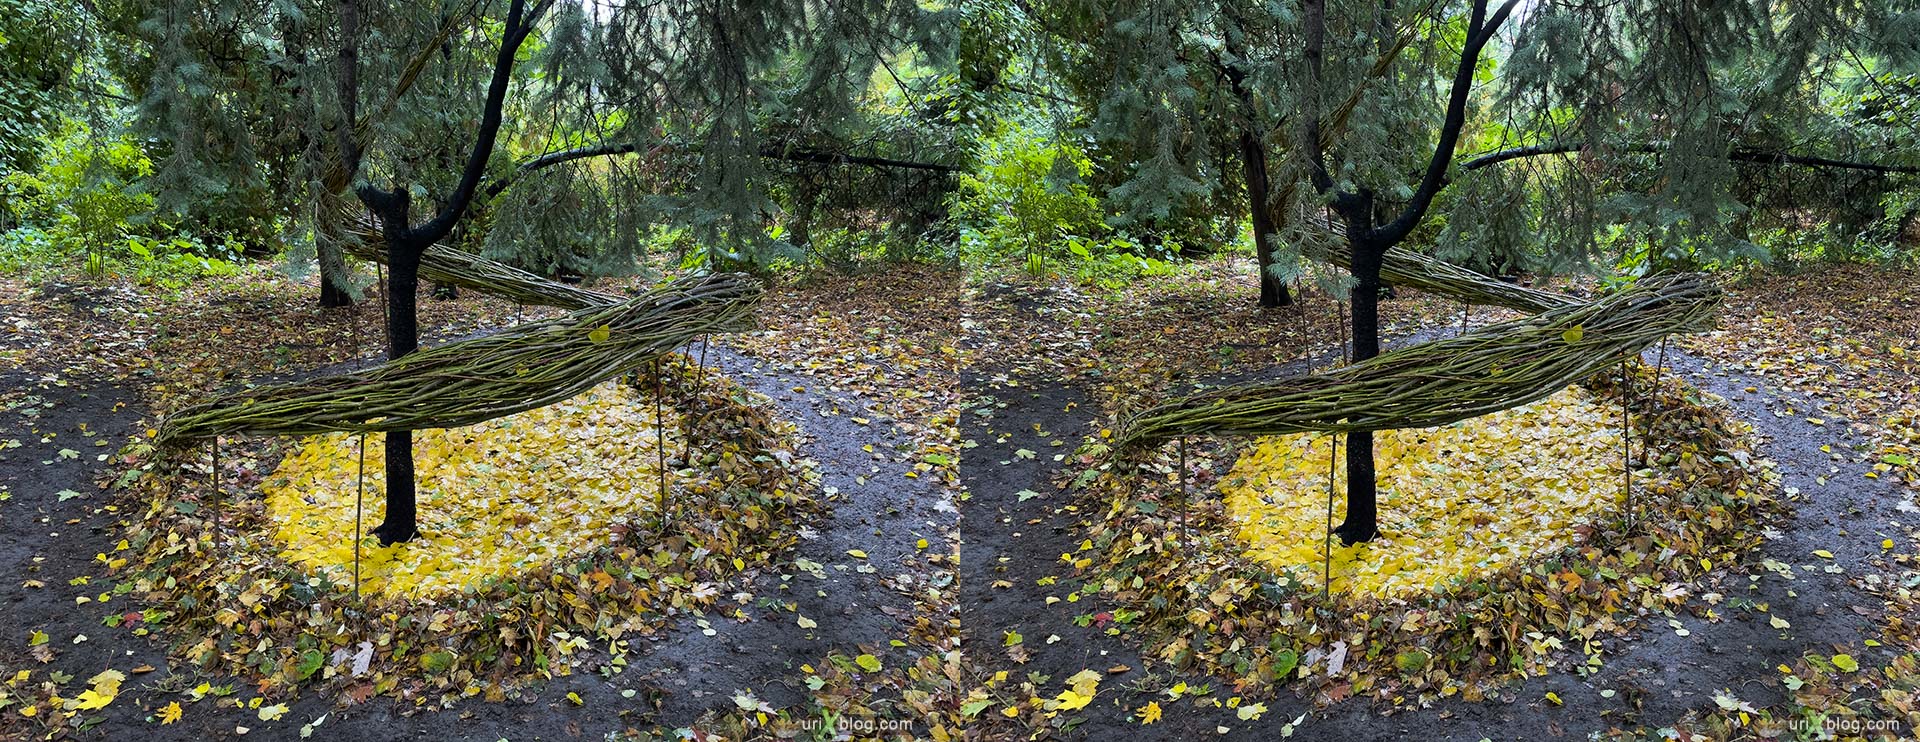 Pharmaceutical Garden, Russia, Moscow, 3D, stereo pair, cross-eyed, crossview, cross view stereo pair, stereoscopic